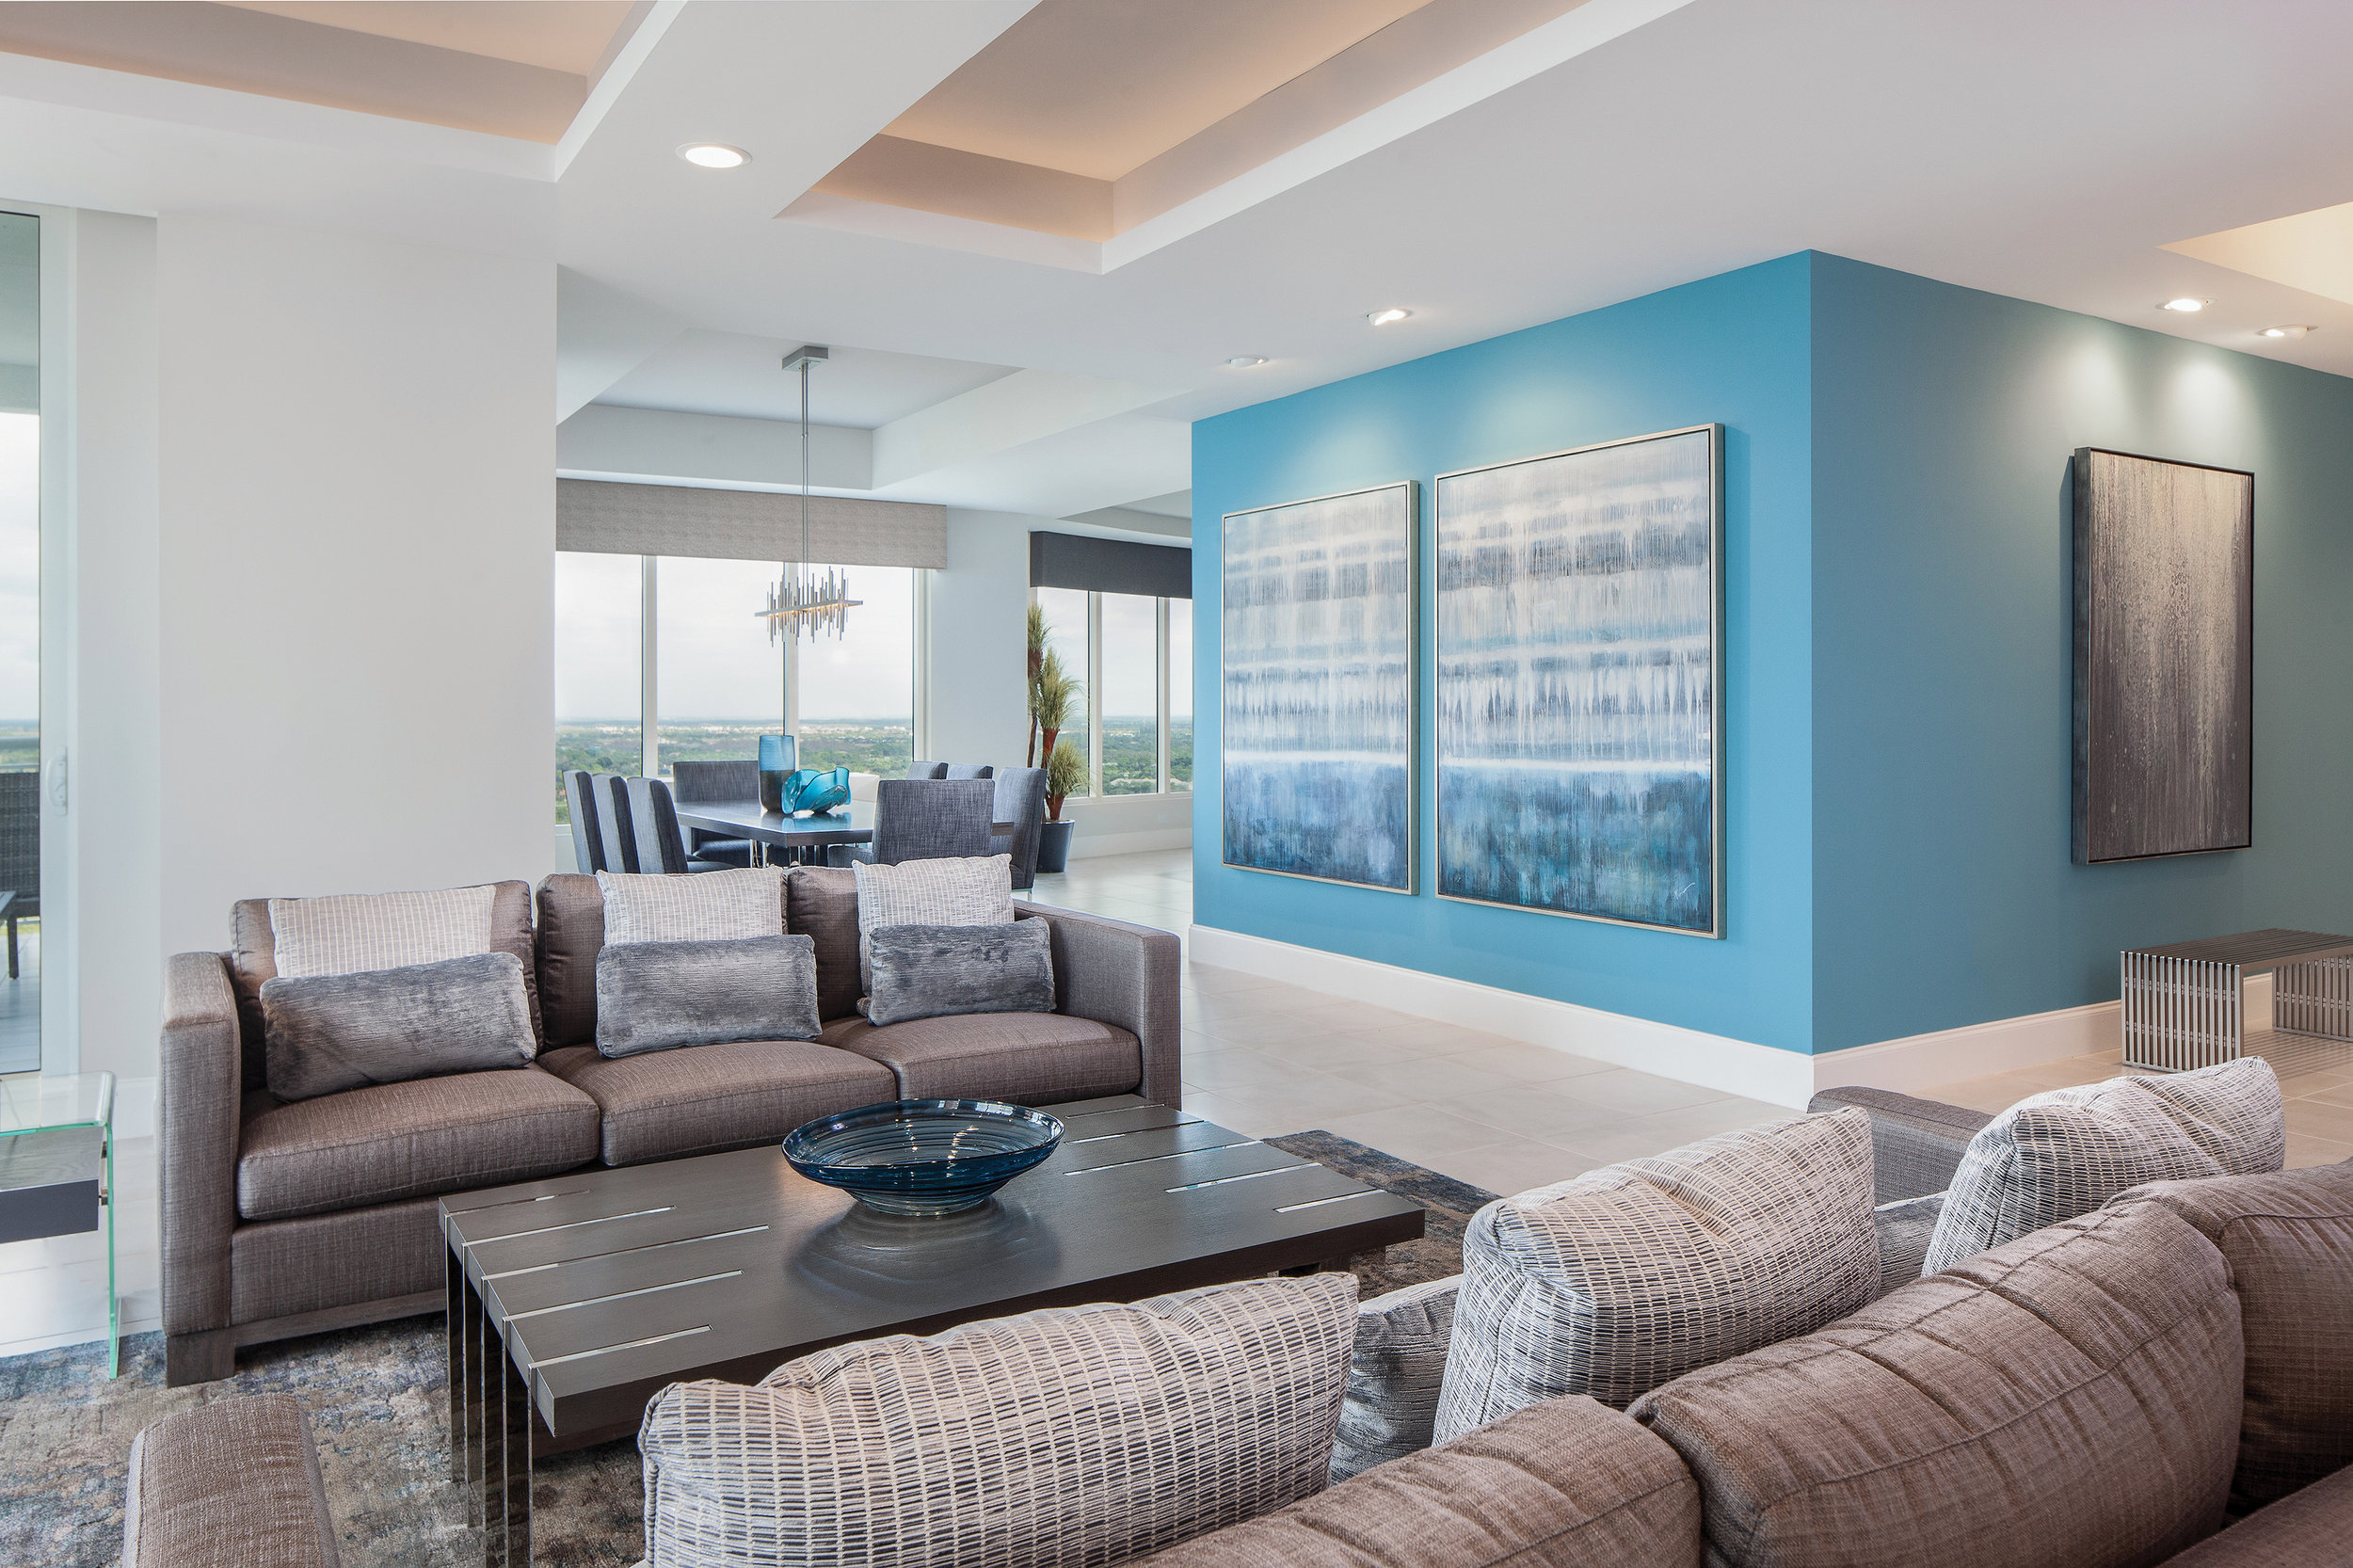  This penthouse condo features 4300 square feet of living space complete with expansive views and fantastic natural light. Combining the homeowners’ varied design aesthetics, natural tones are accented with pops of color. “The condo is owned by a won